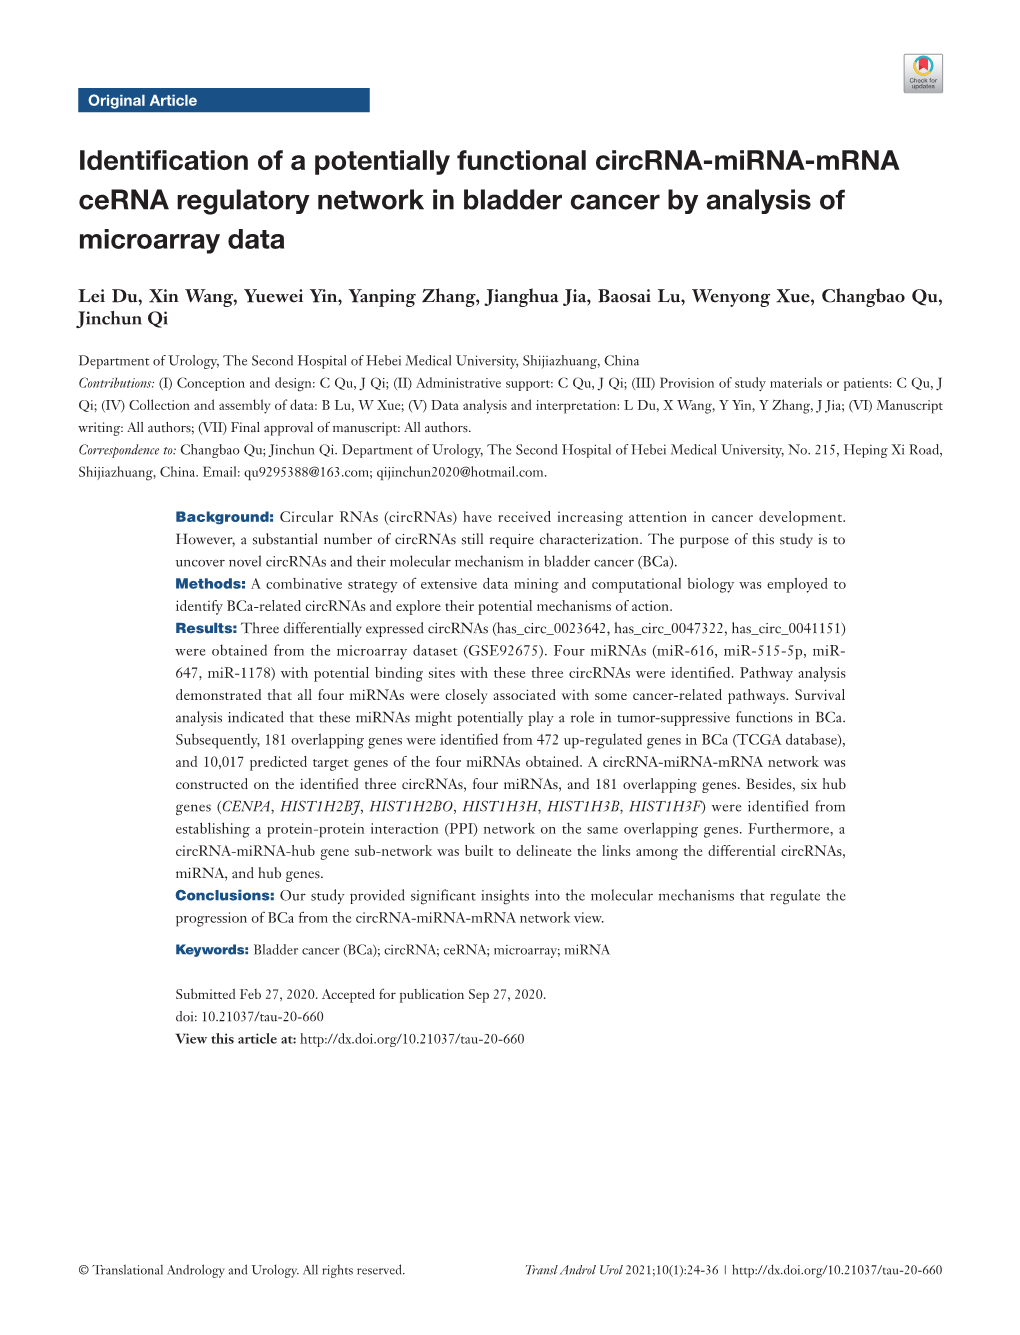 Identification of a Potentially Functional Circrna-Mirna-Mrna Cerna Regulatory Network in Bladder Cancer by Analysis of Microarray Data